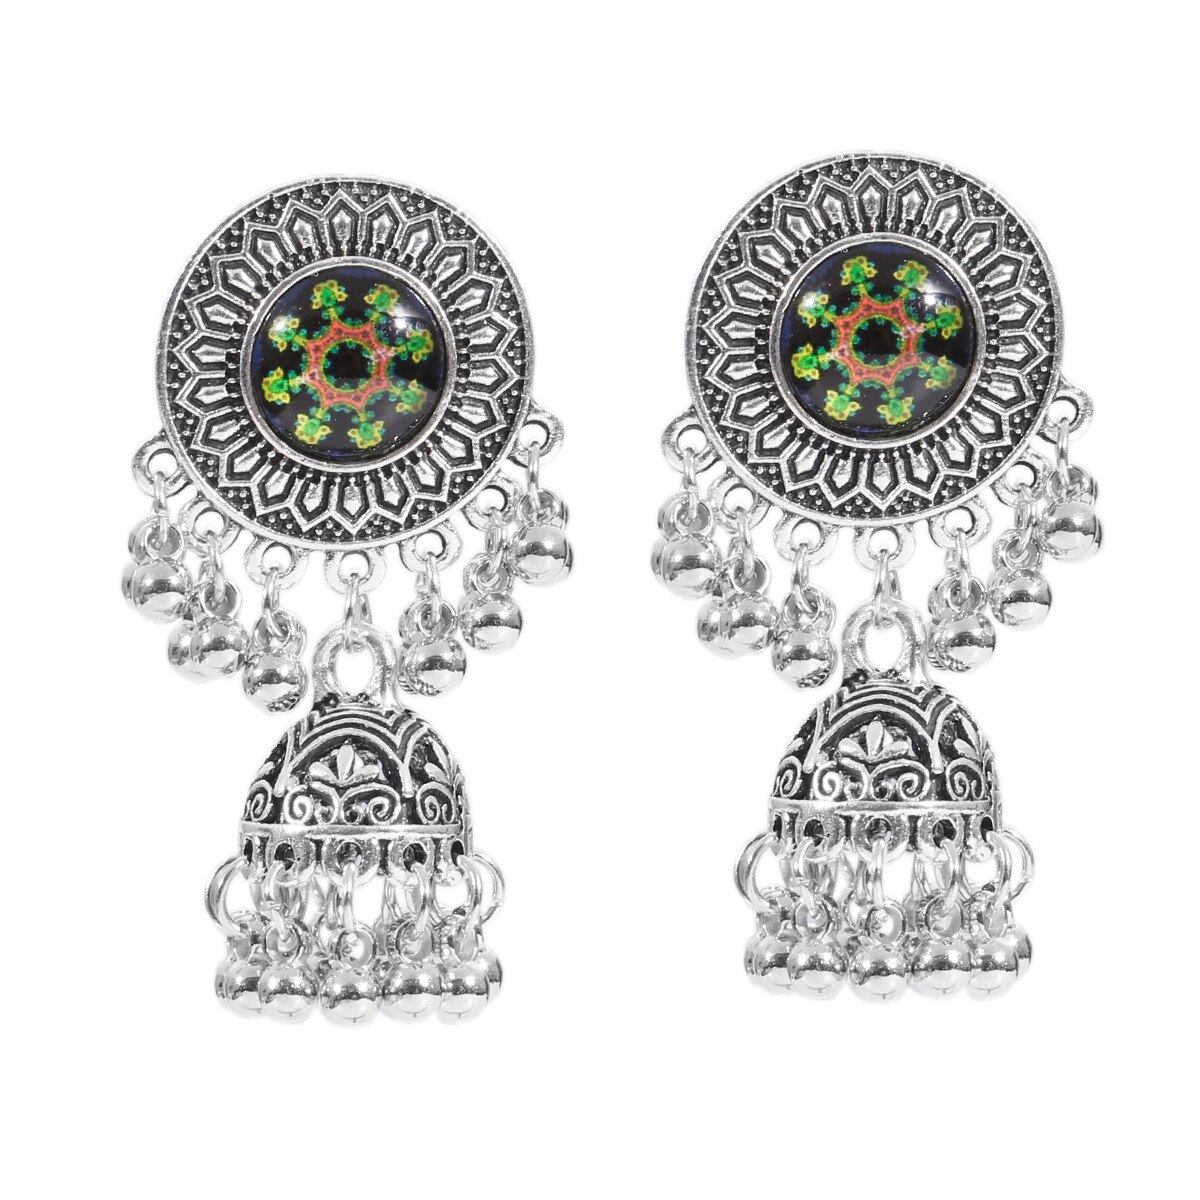 Classic-Vintage-Silver-Color-Alloy-Carved-Bollywood-Oxidized-Earrings-For-Women-Ethnic-Rose-Red-Jhum-1005003651700580-7